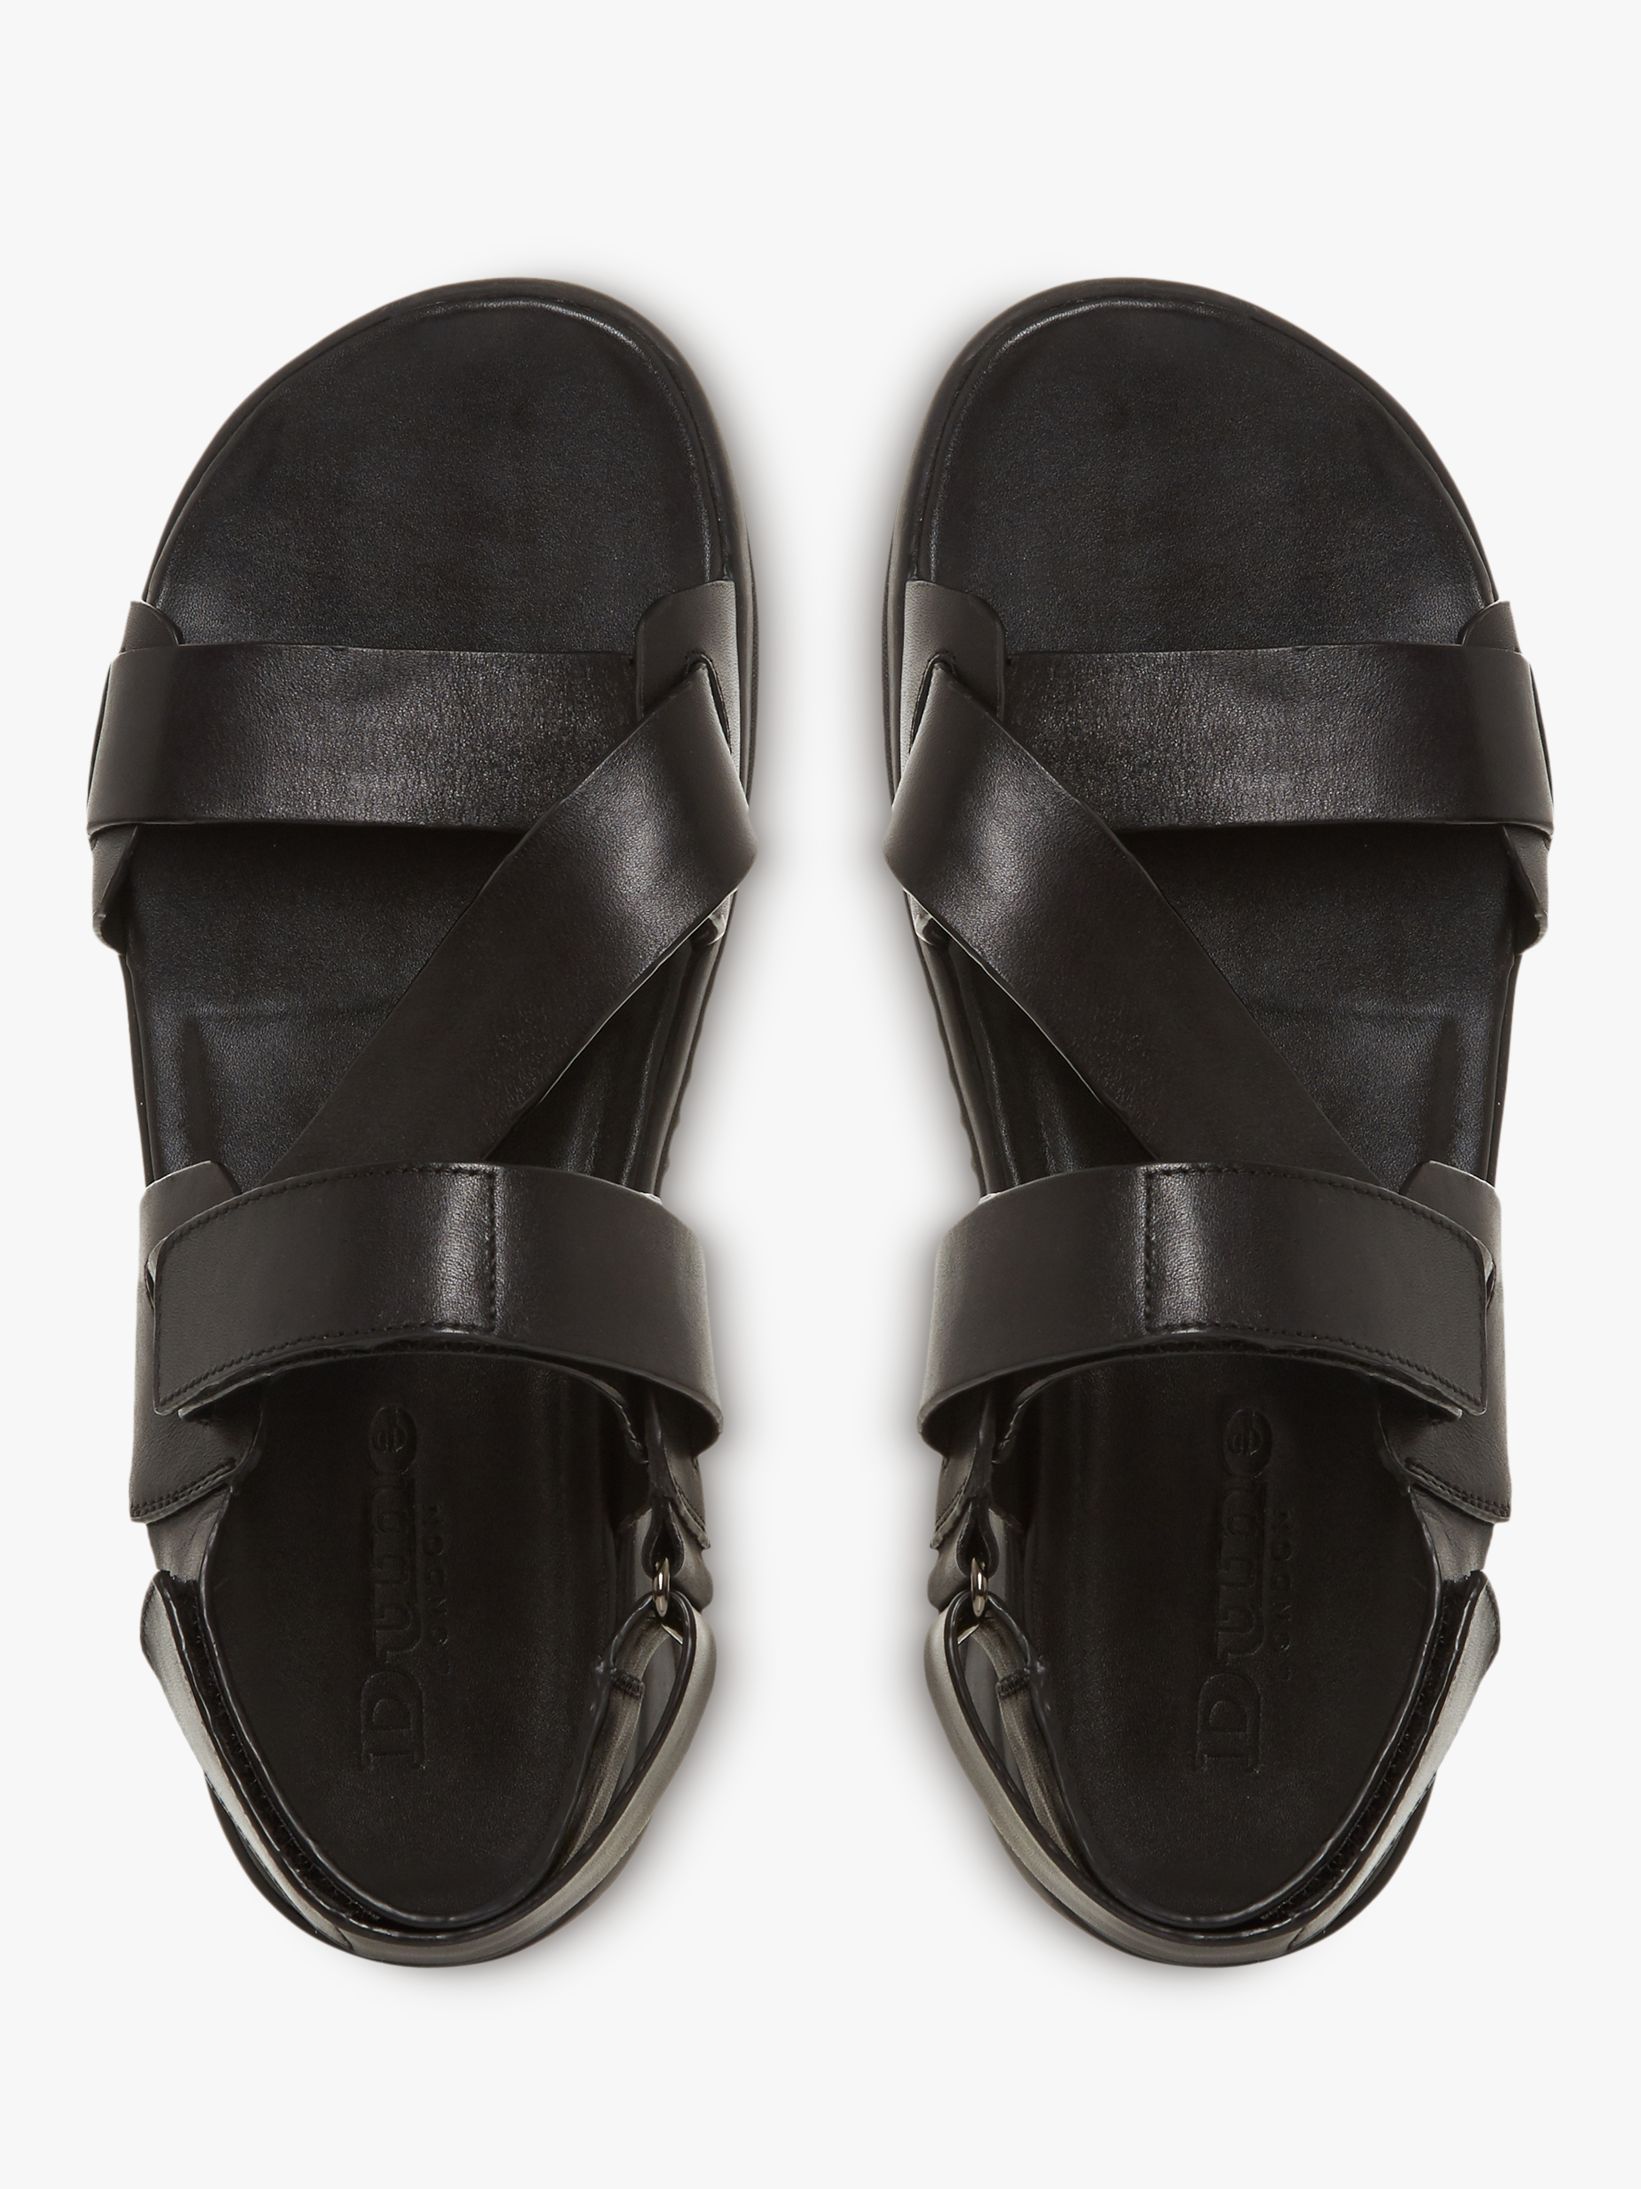 Dune Instantly Leather Sandals, Black at John Lewis & Partners